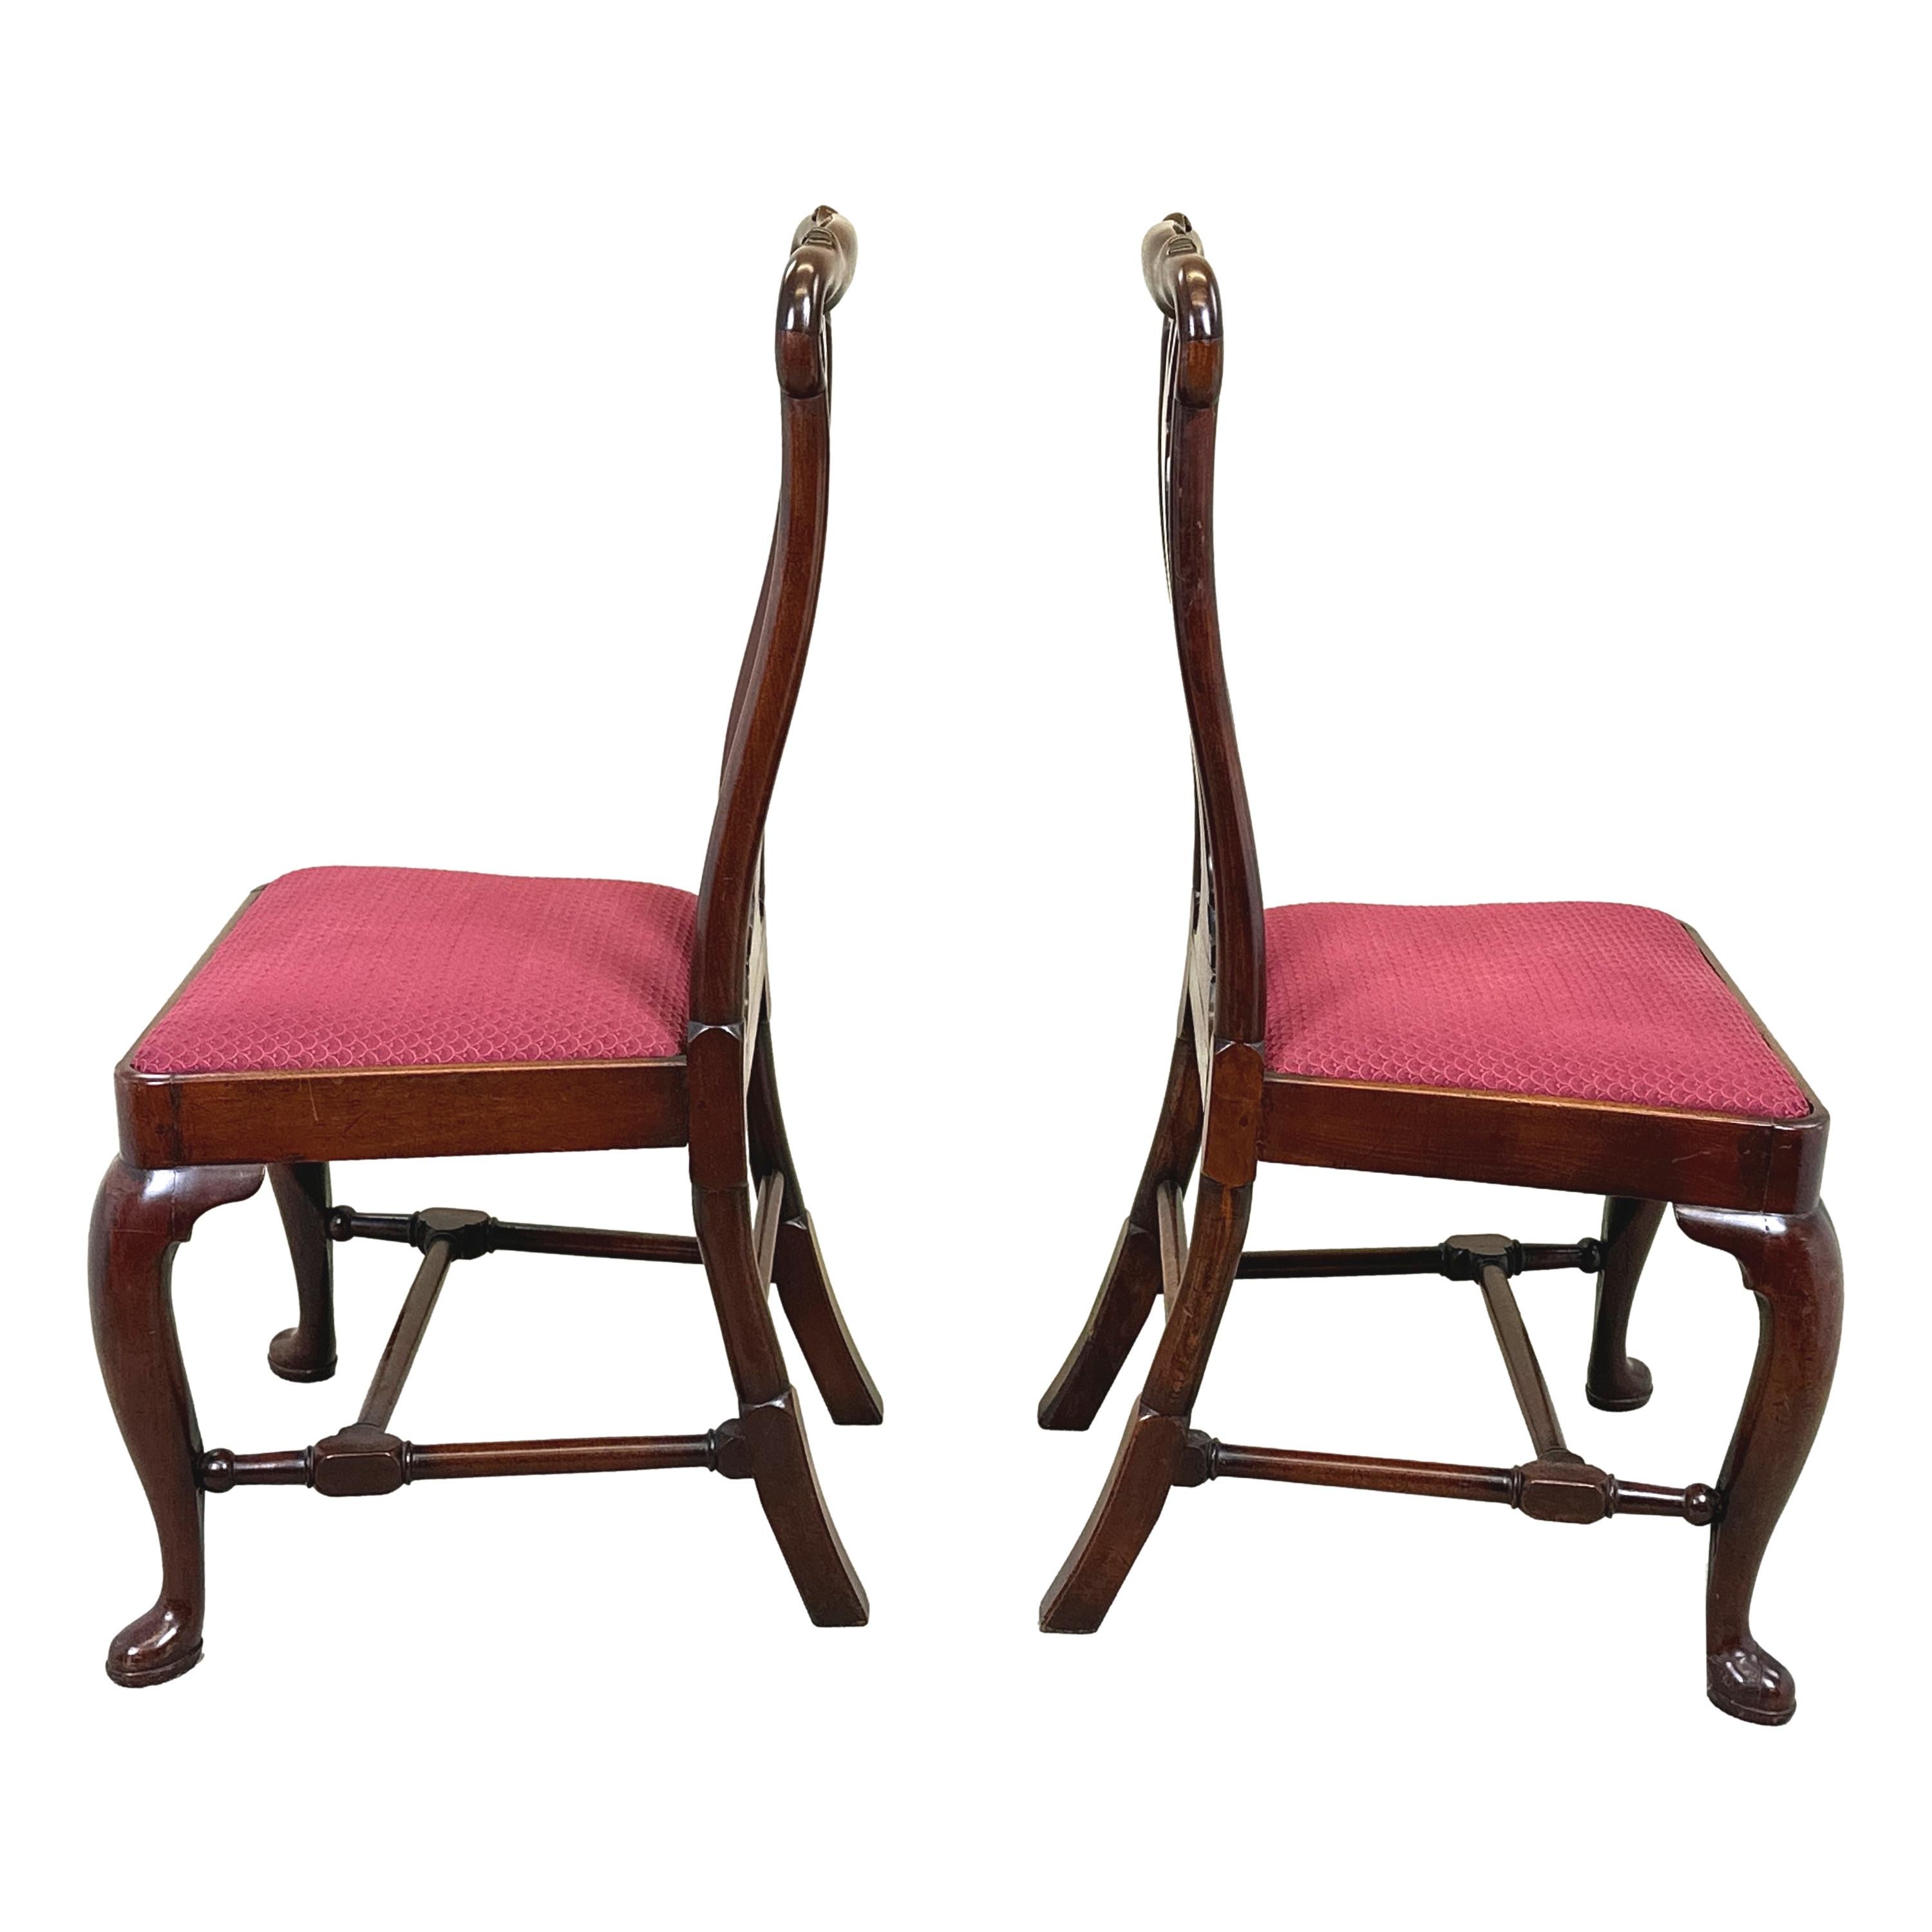 Georgian Pair Of Early 18th Century Side Chairs